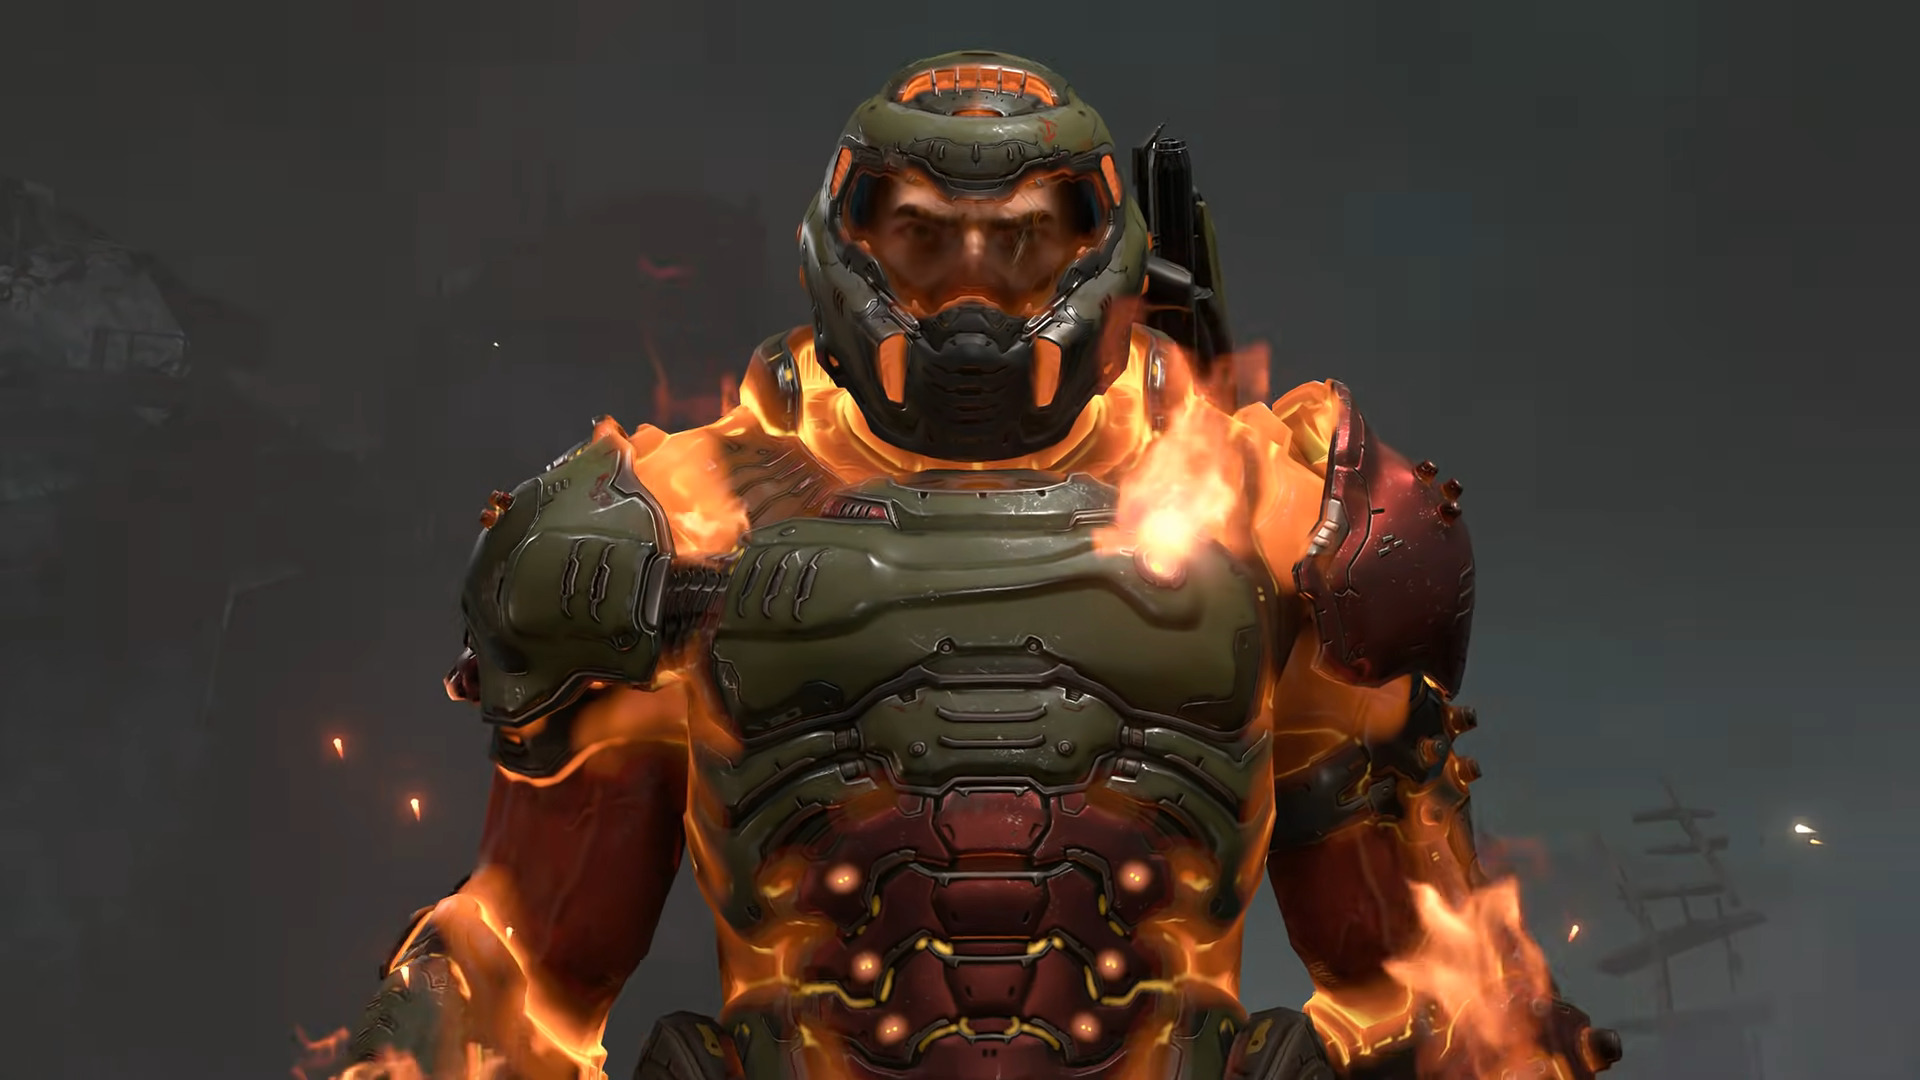 The Doom Slayer (Matthew Waterson) is far from finished with Hell's minions in Doom Eternal (2020), Bethesda